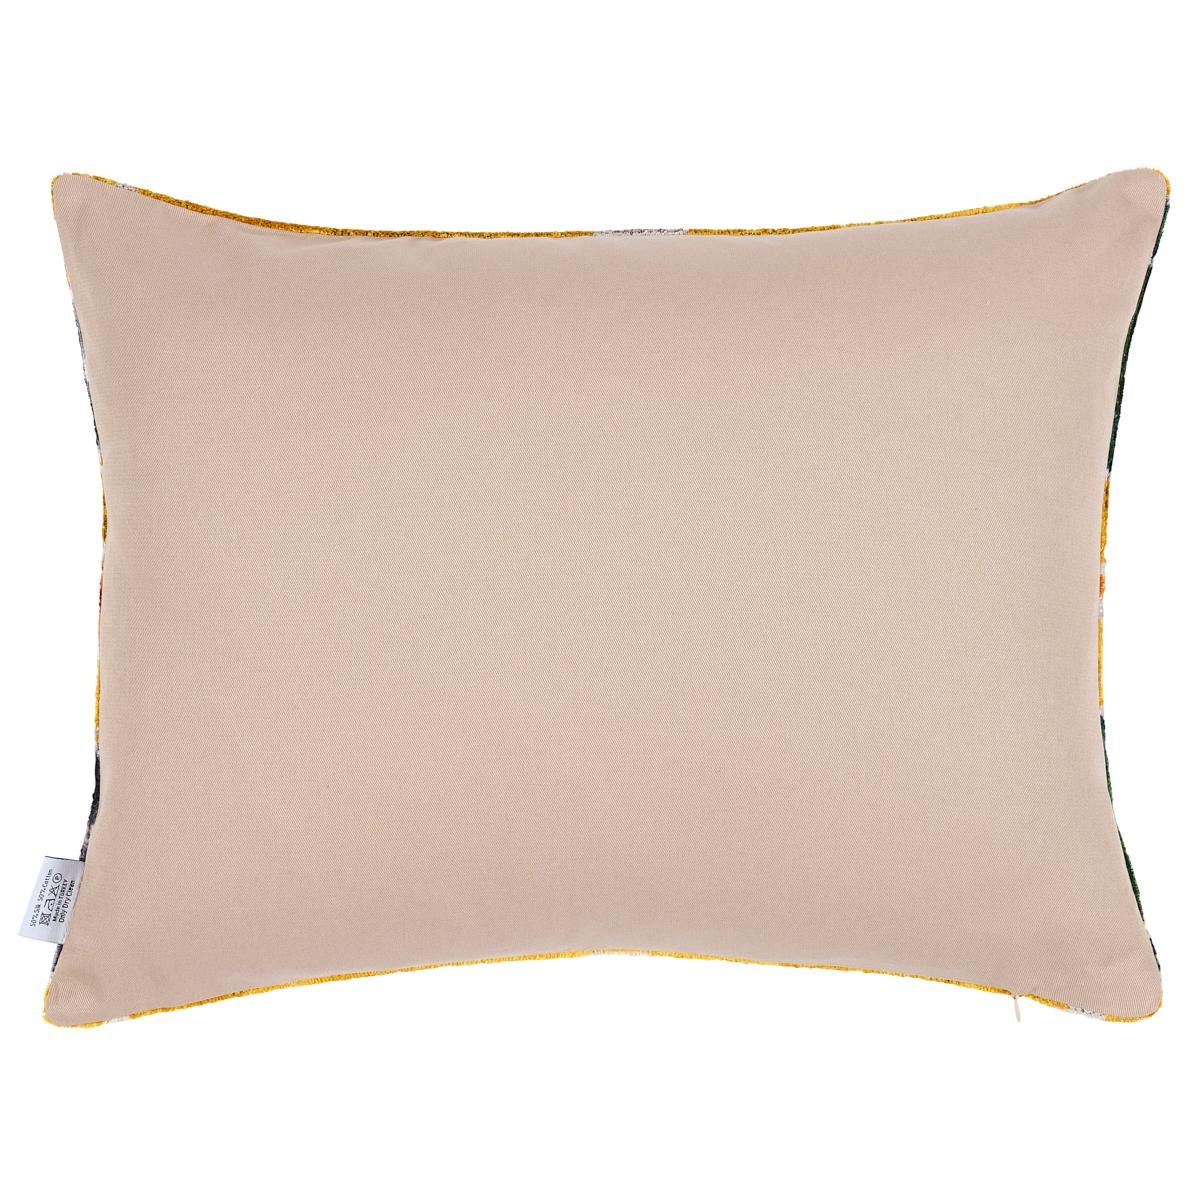 The Konya Silk Velvet Pillow by Les Ottomans features handwoven fabric with a knife edge finish. Les Ottomans pillows are handmade in Istanbul, juxtaposing the traditional patterns of Turkey with a wide range of contemporary colors, designs and